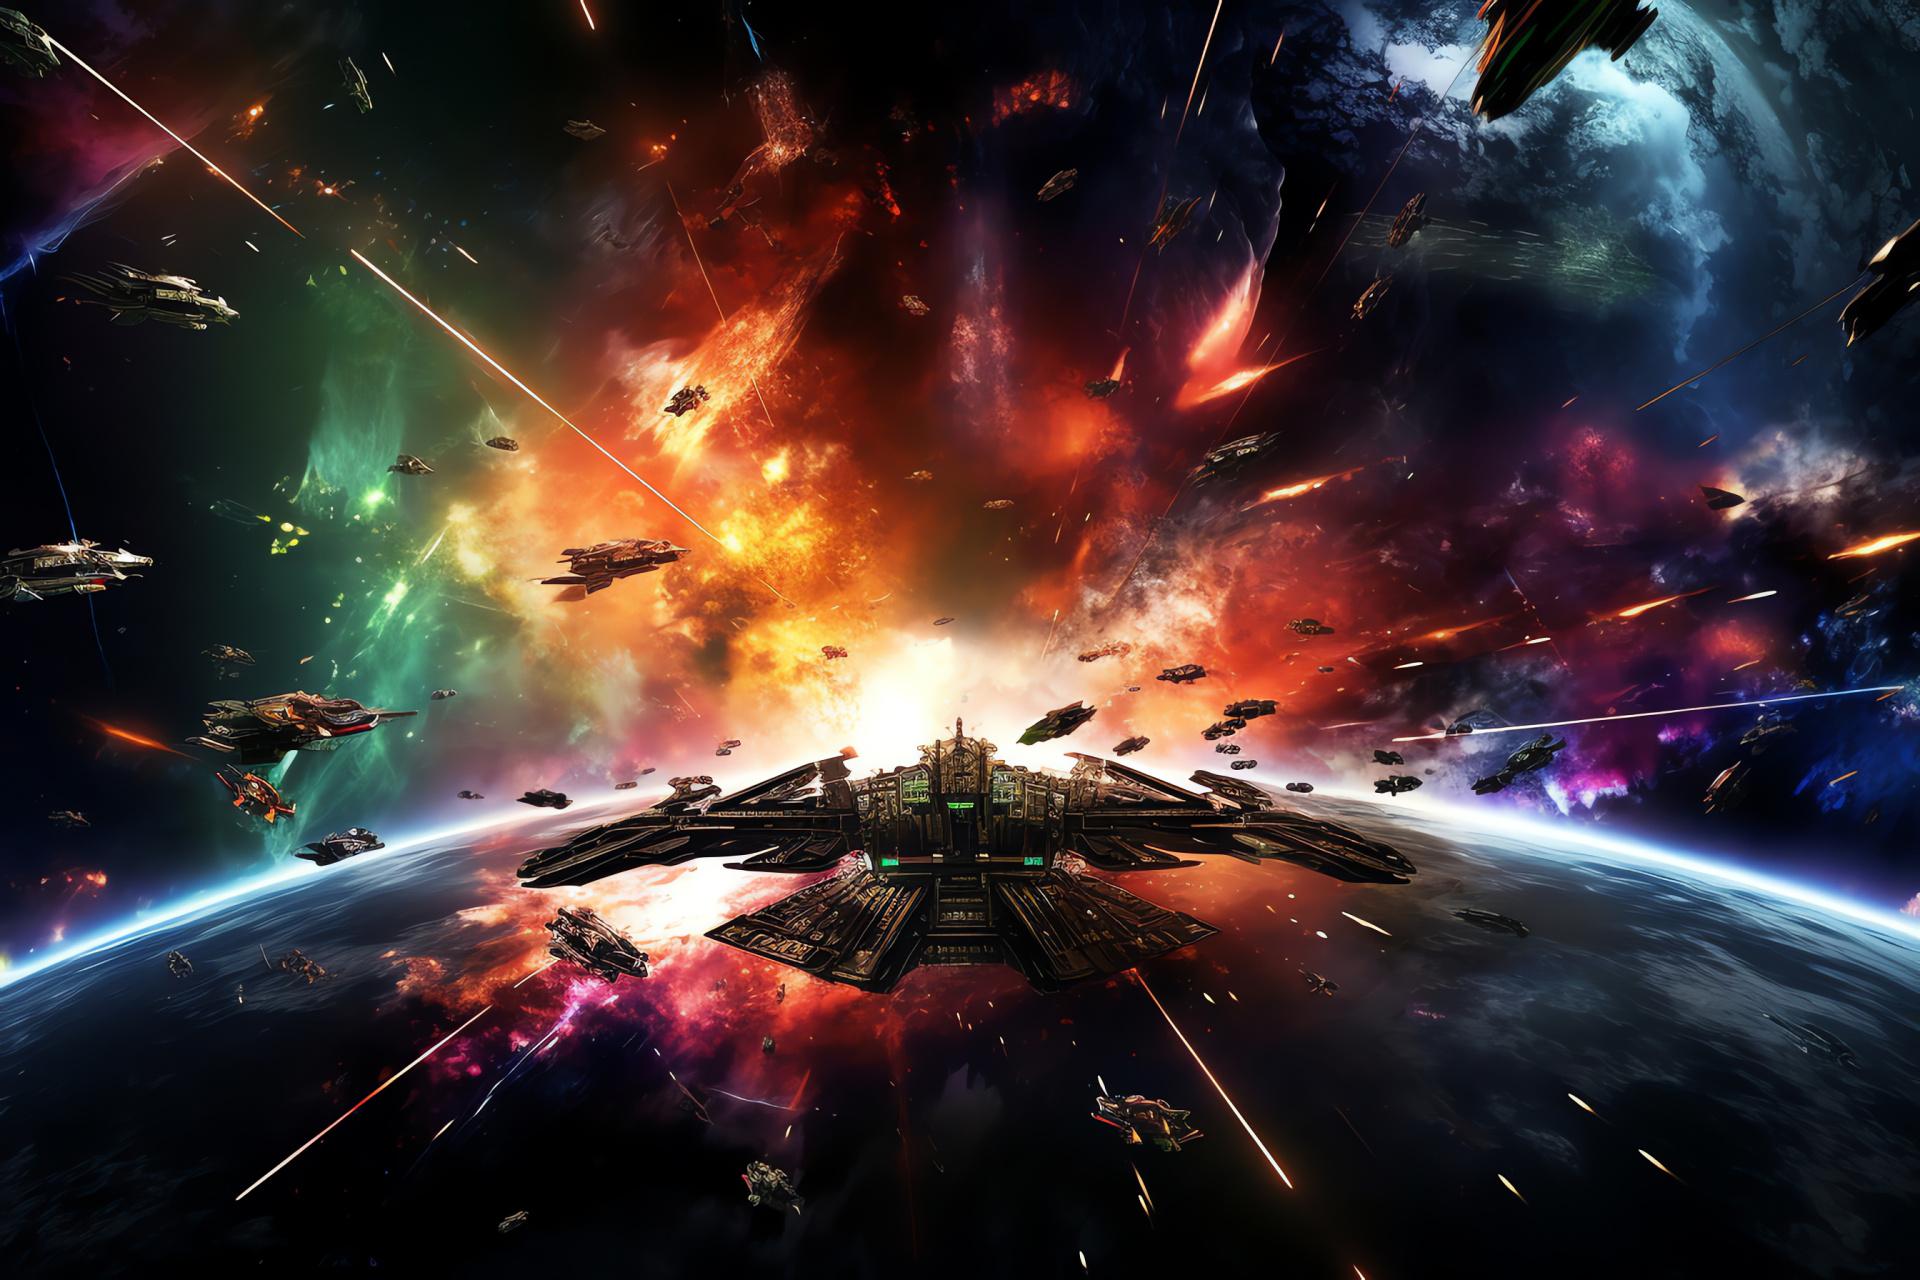 Intergalactic confrontation, Galactic hue explosion, Starship engagement panorama, Space conflict scales, Celestial spectrum, HD Desktop Image